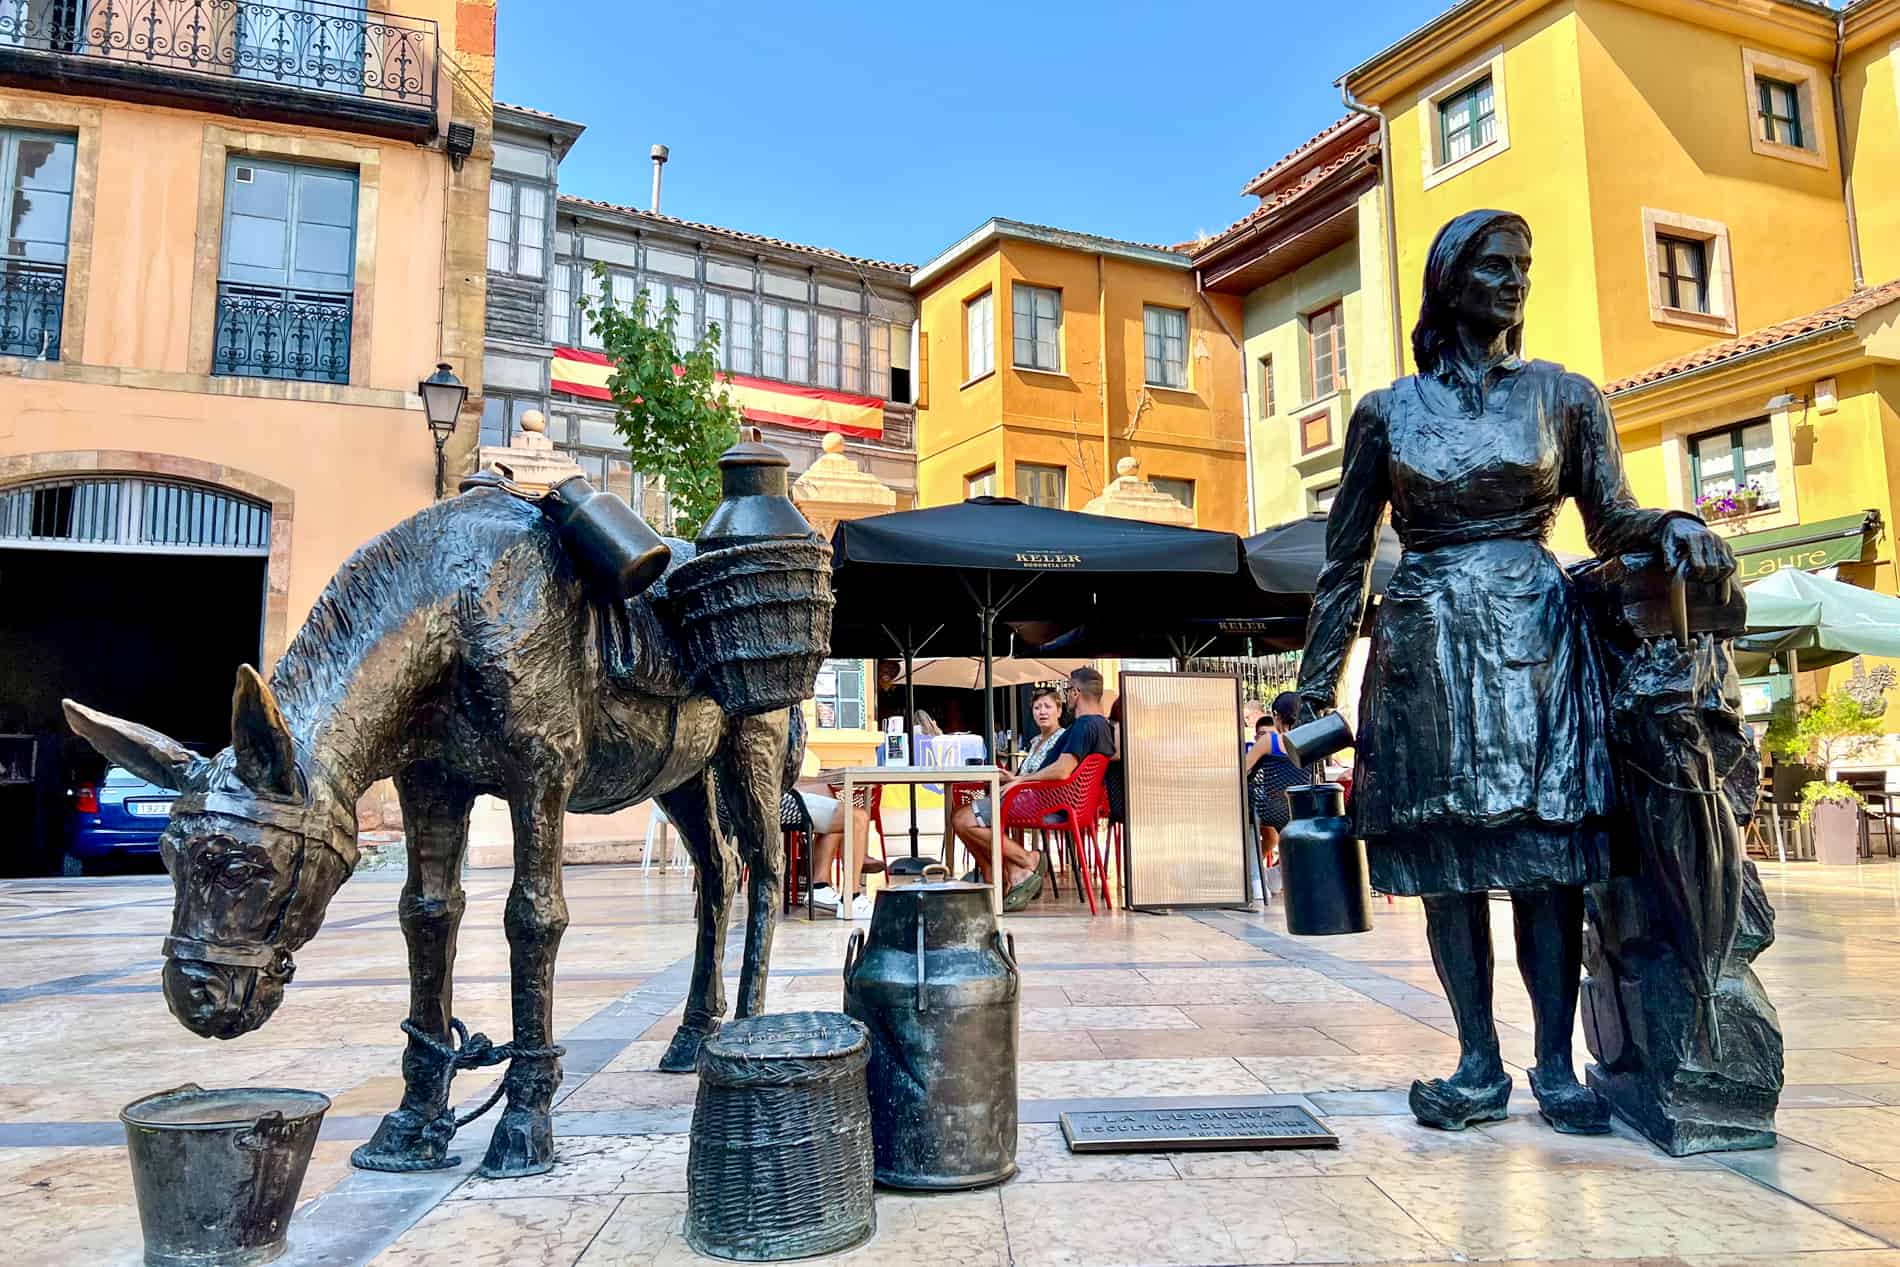 The 'La Lechera' statue in Oviedo of a milkmaid with her donkey in a colourful cafe-lined square. 